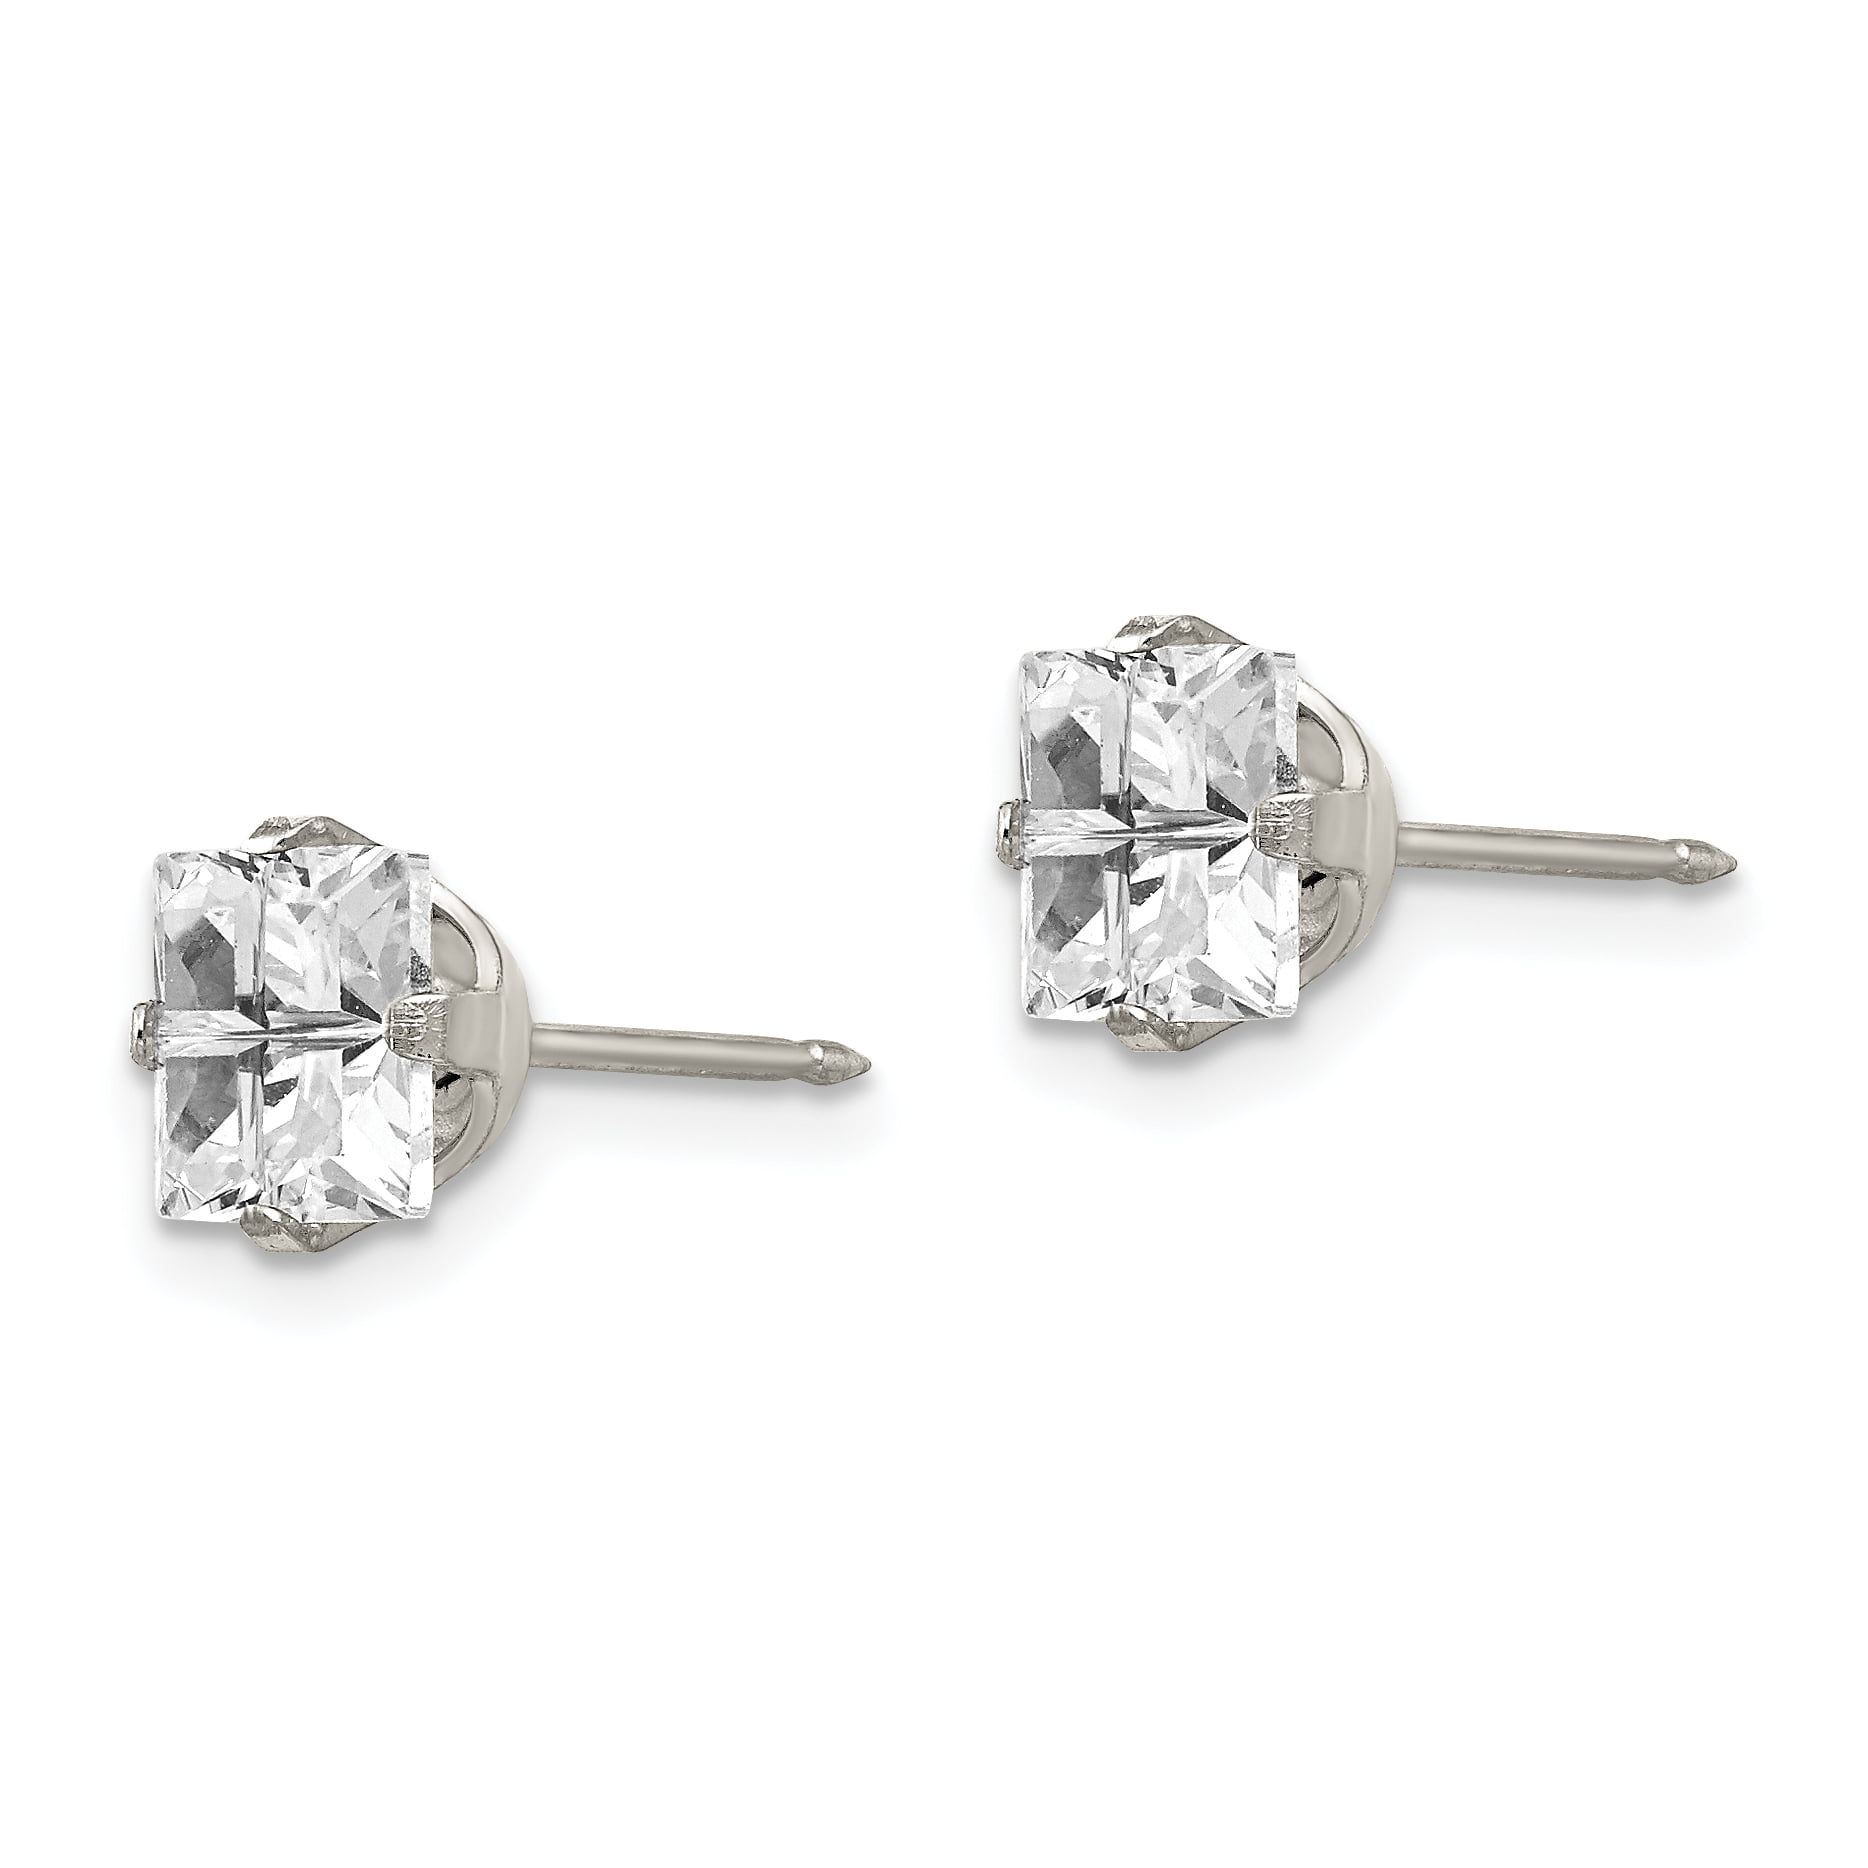 Children's Inverness Stainless Steel 7 MM Faceted Square CZ Stud Earrings 